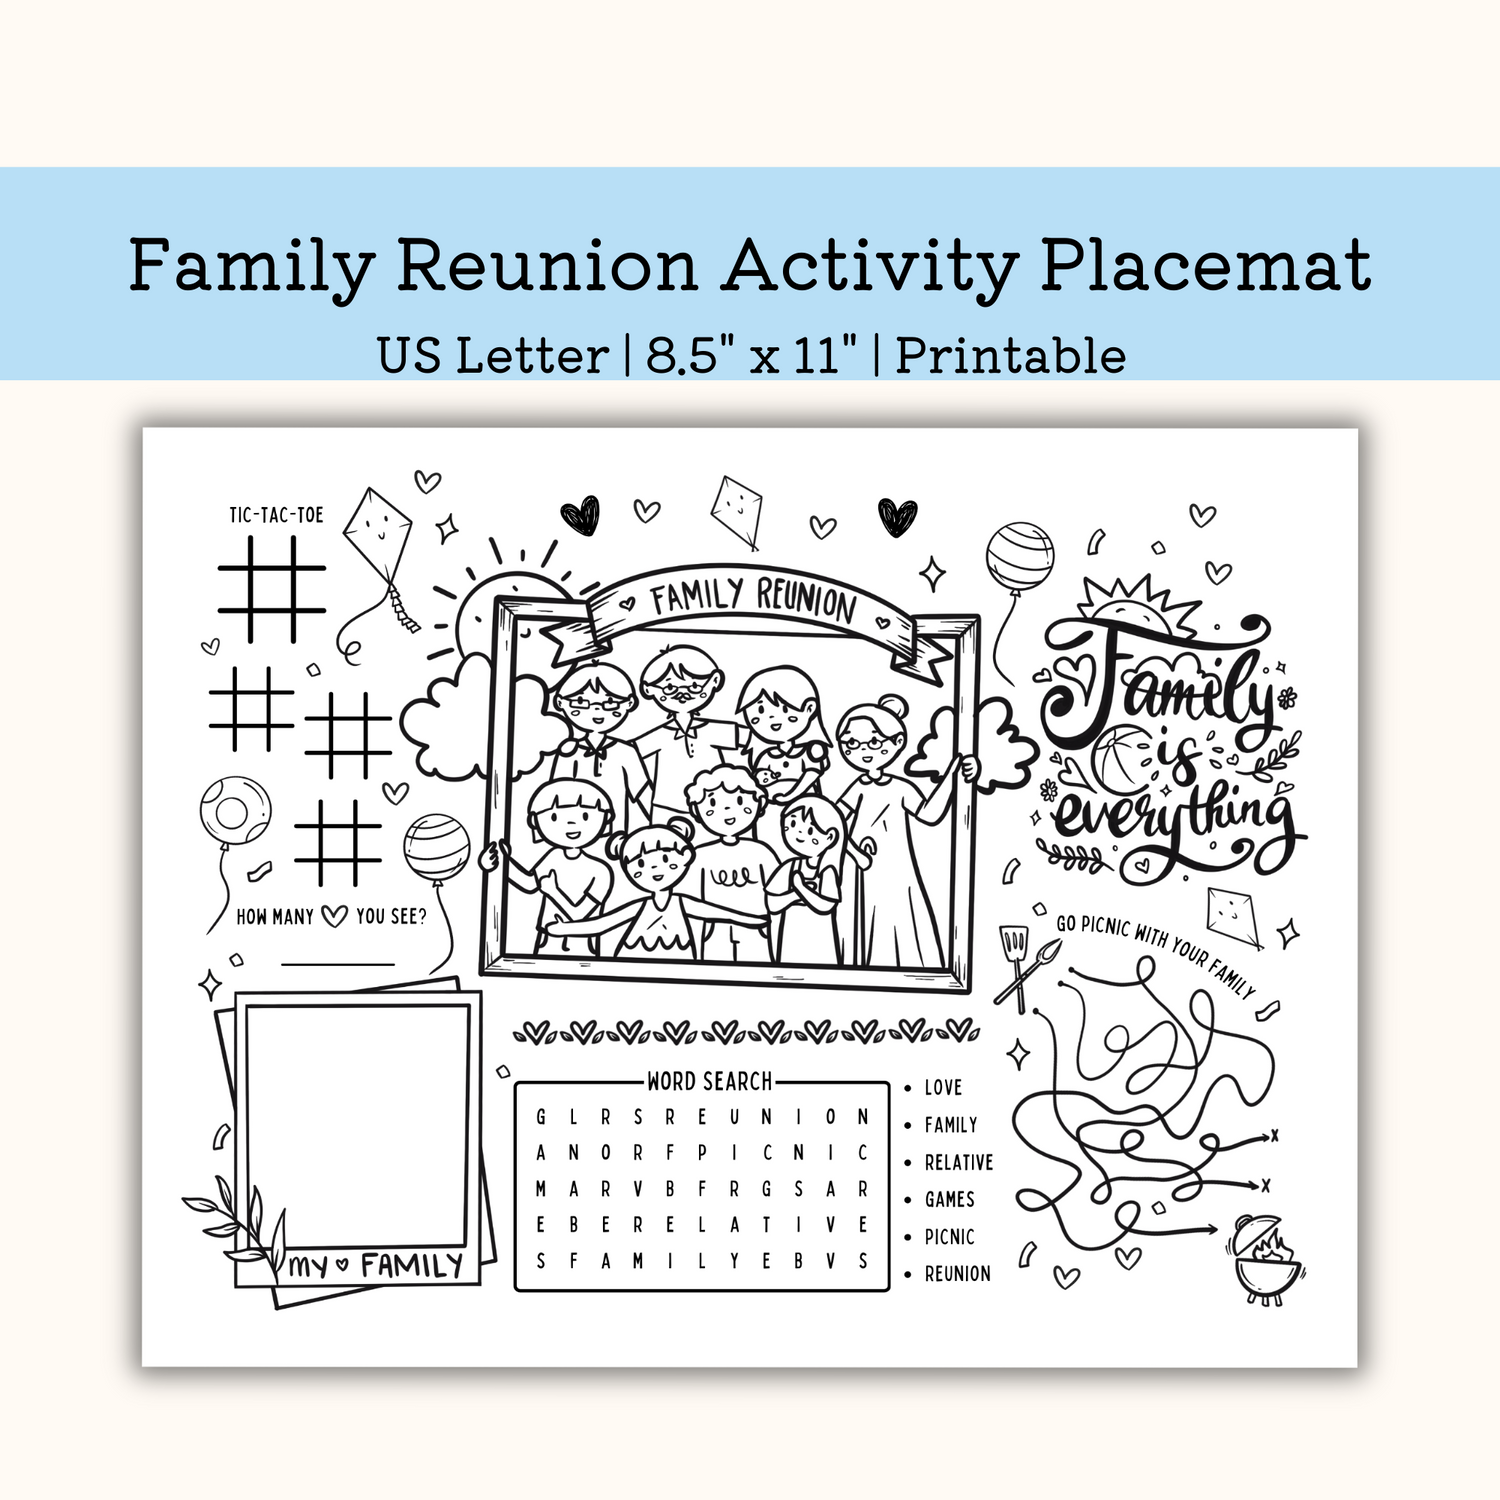 Printable family reunion activity placemat